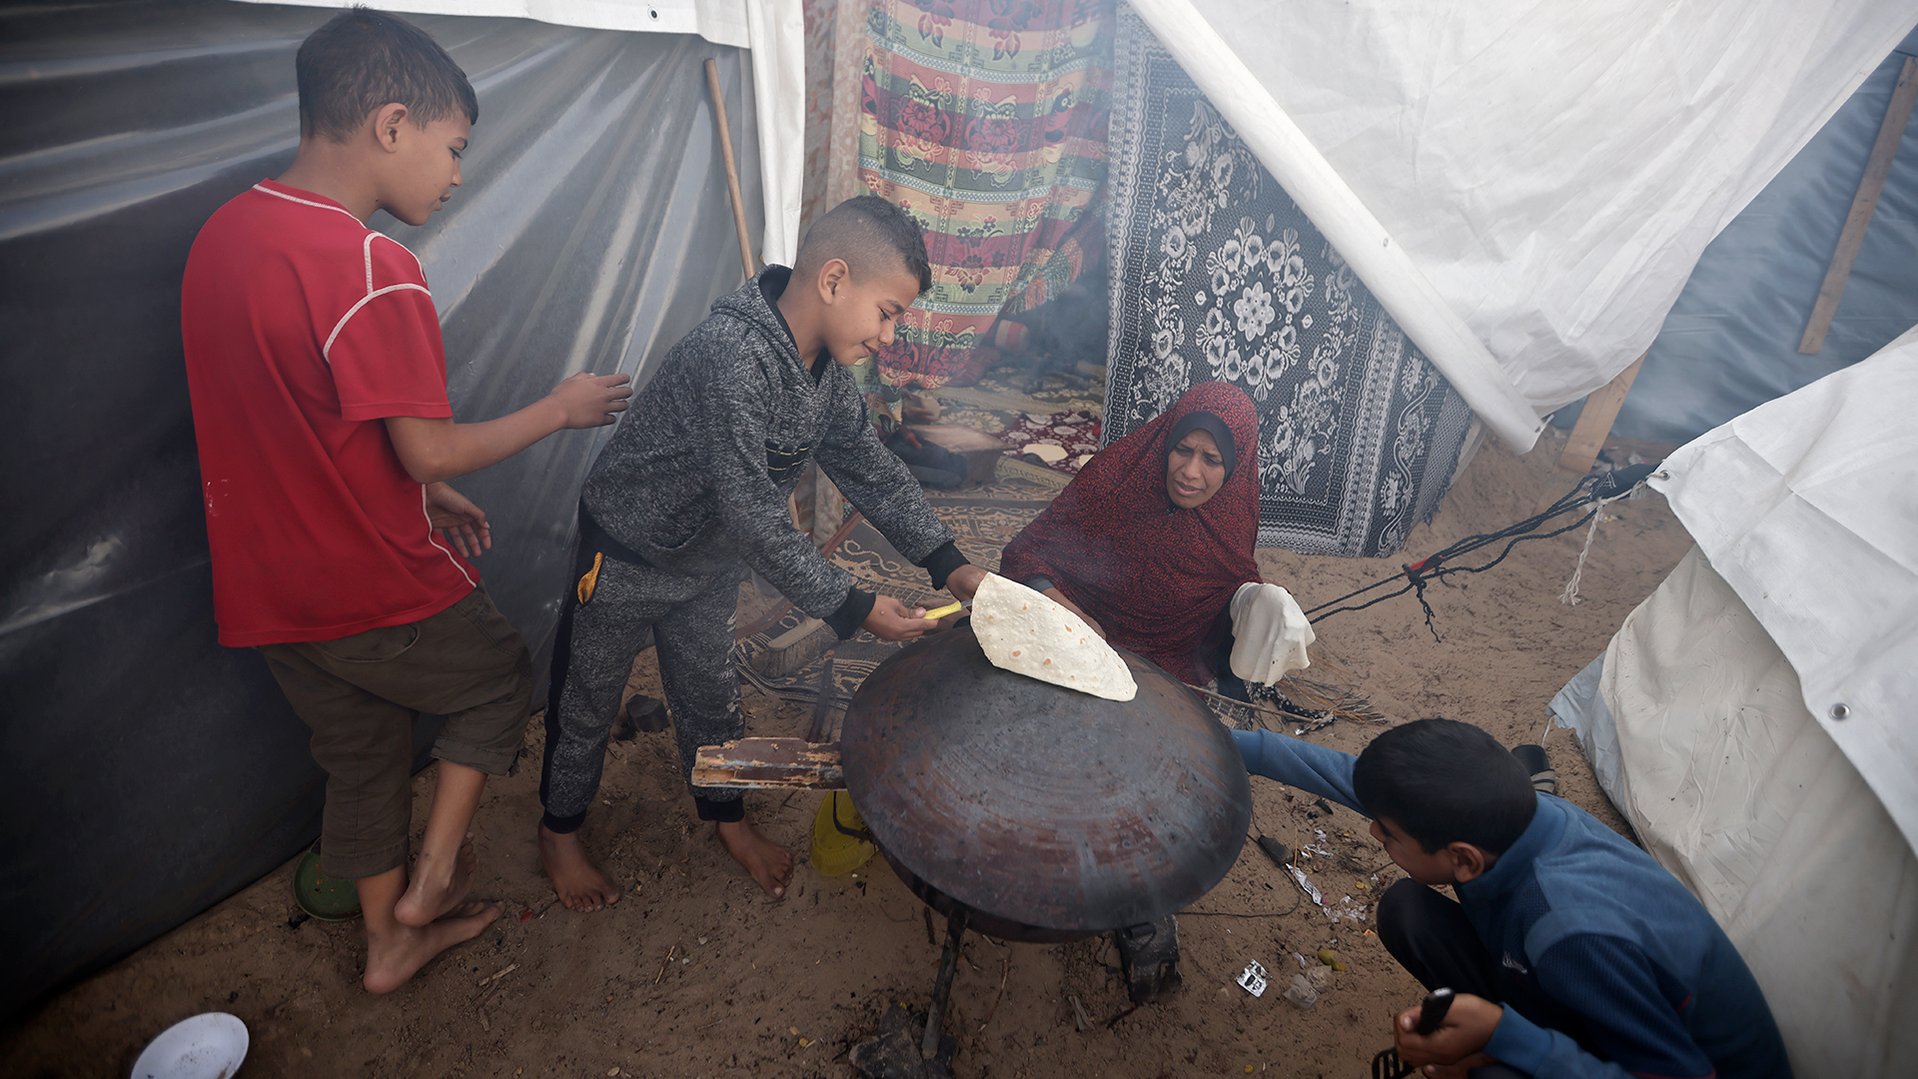 Majed and his family were forced to flee their house in Gaza was damaged by heavy bombardment.